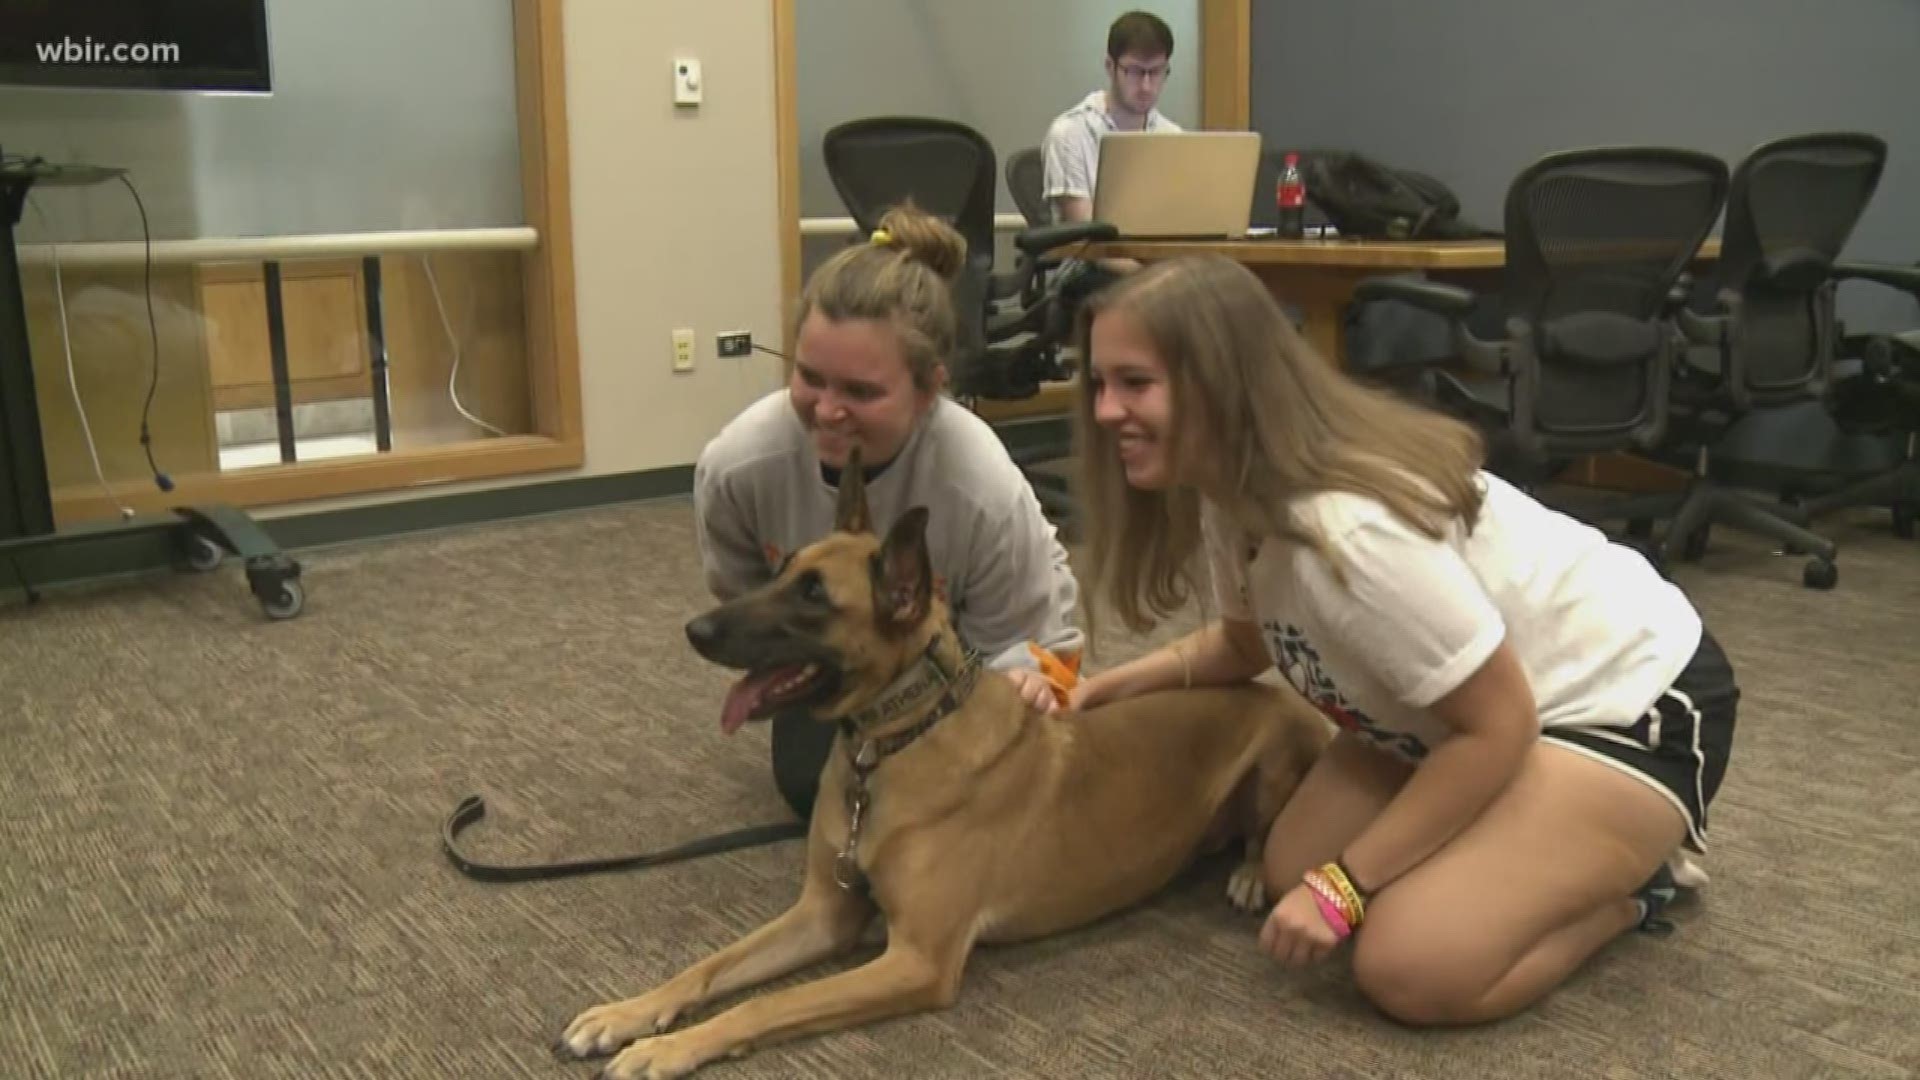 Students, faculty and staff at the University of Tennessee had the chance to meet the UT Police Department K-9s Wednesday.